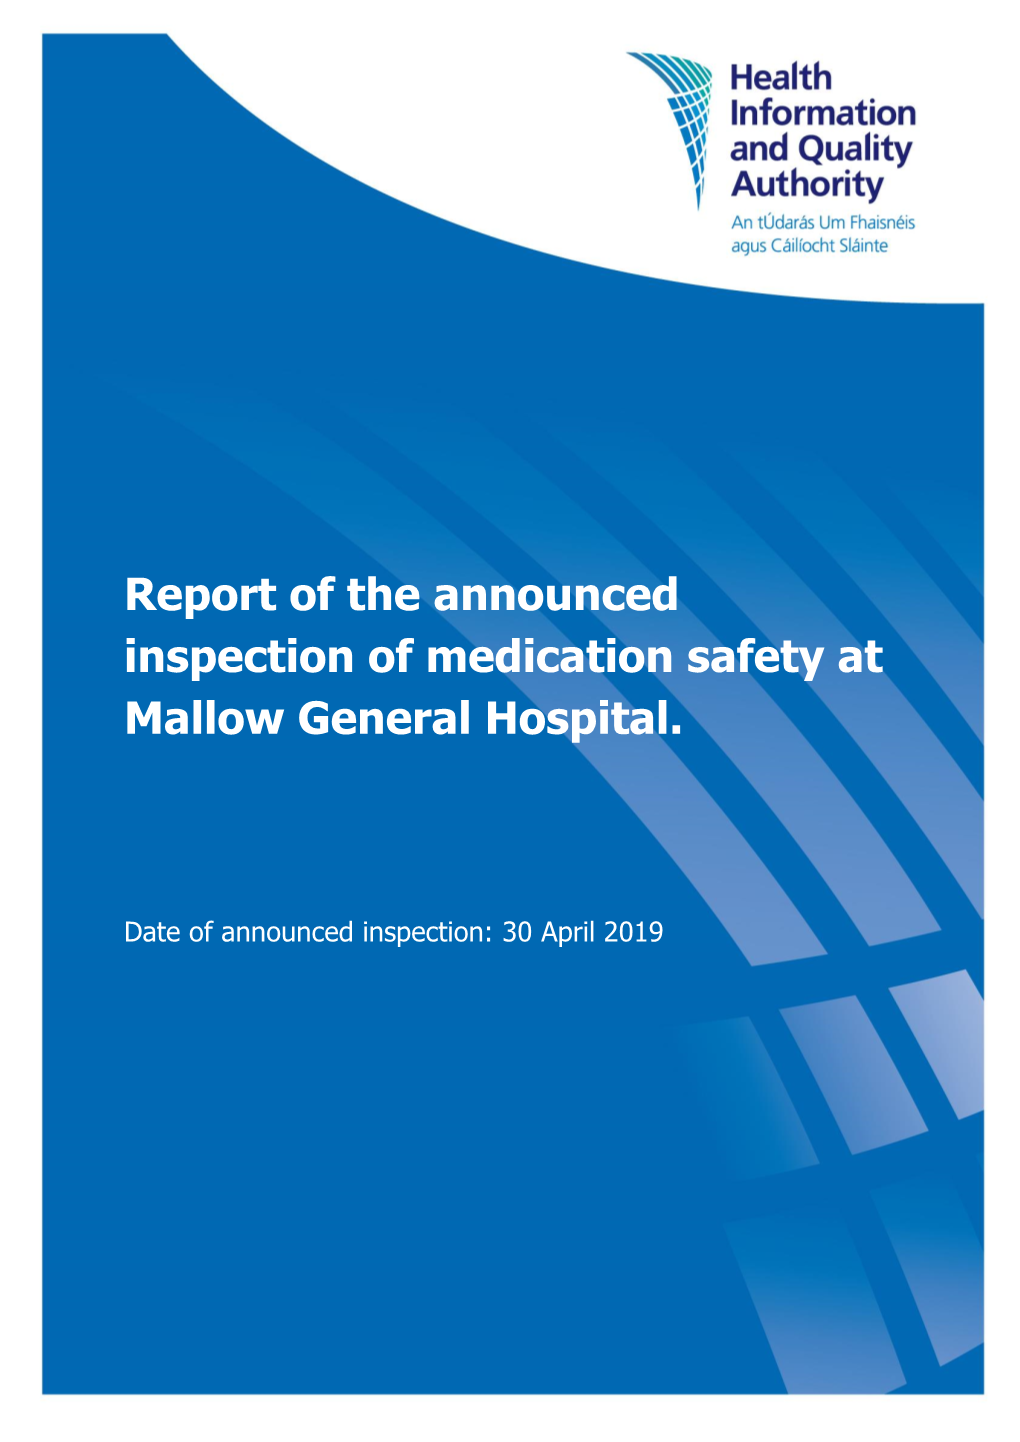 Report of the Announced Inspection of Medication Safety at Mallow General Hospital